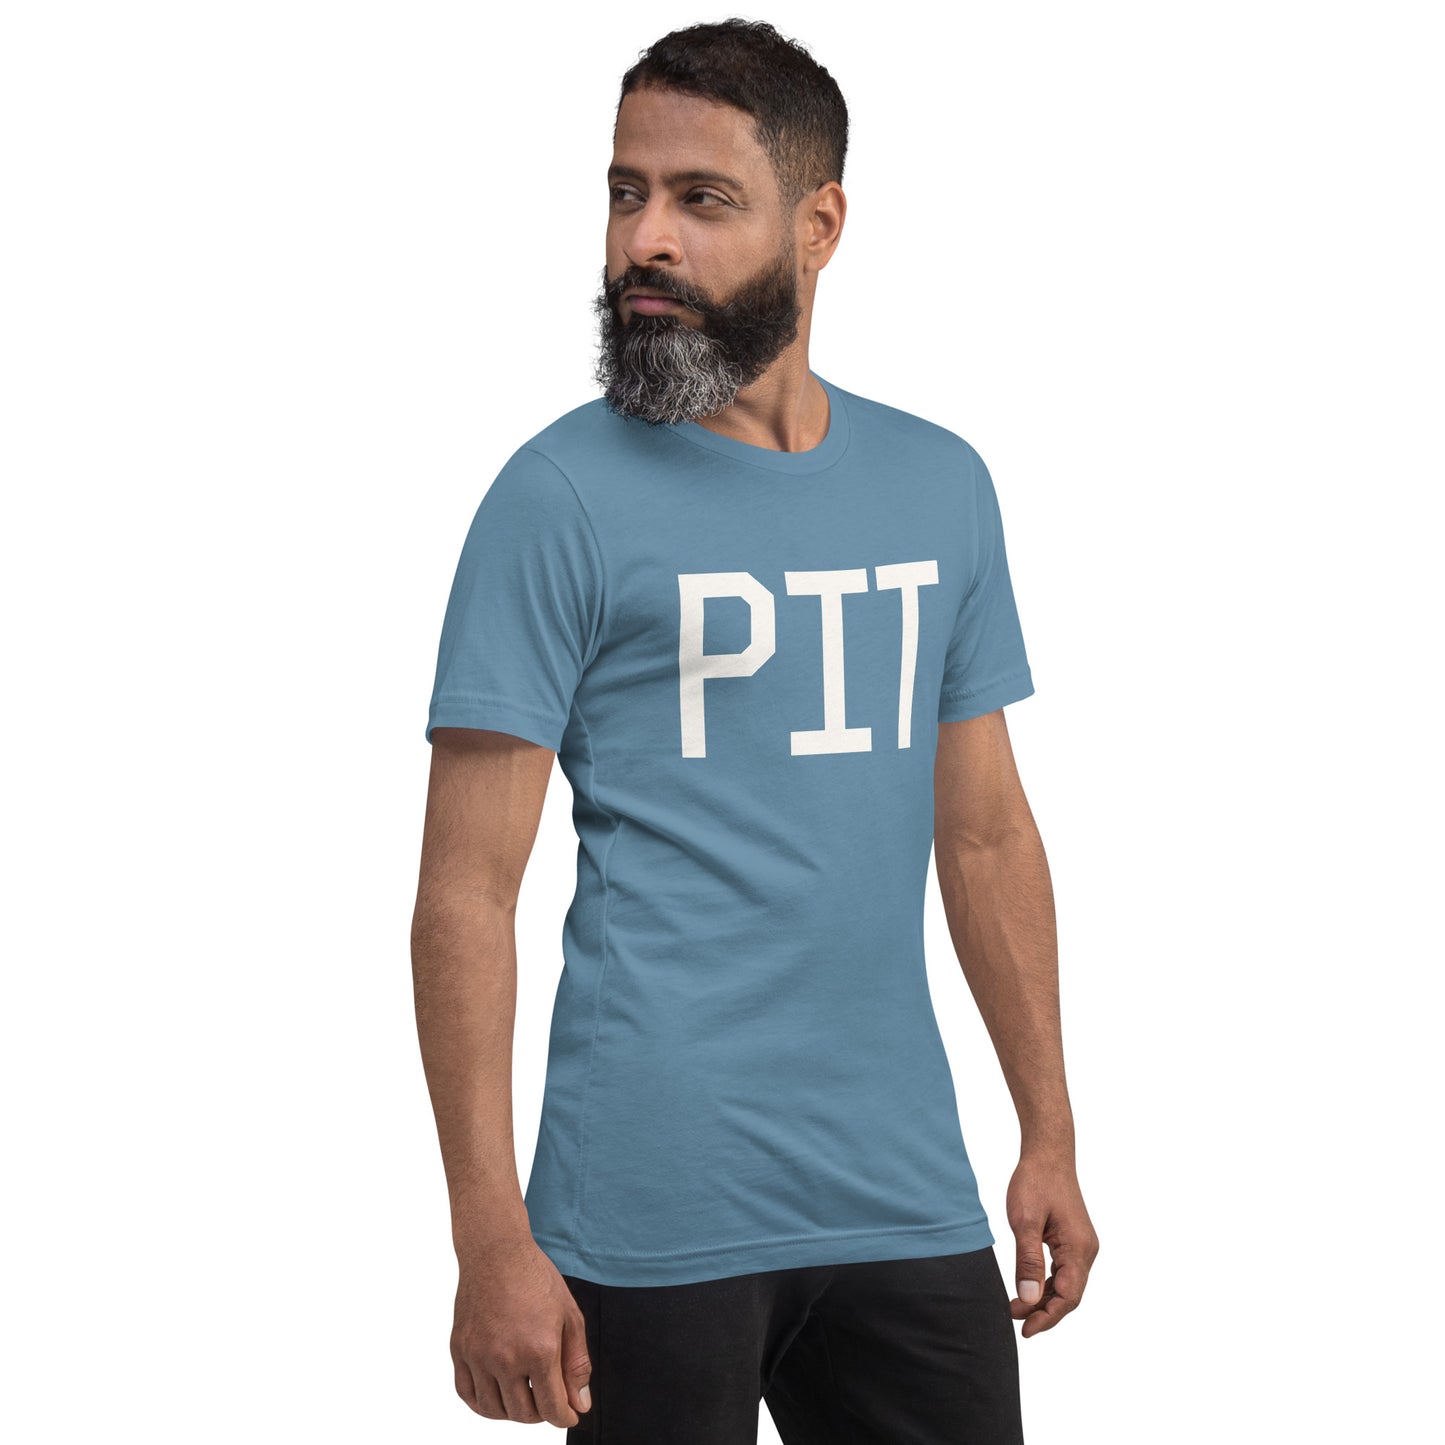 Airport Code T-Shirt - White Graphic • PIT Pittsburgh • YHM Designs - Image 10